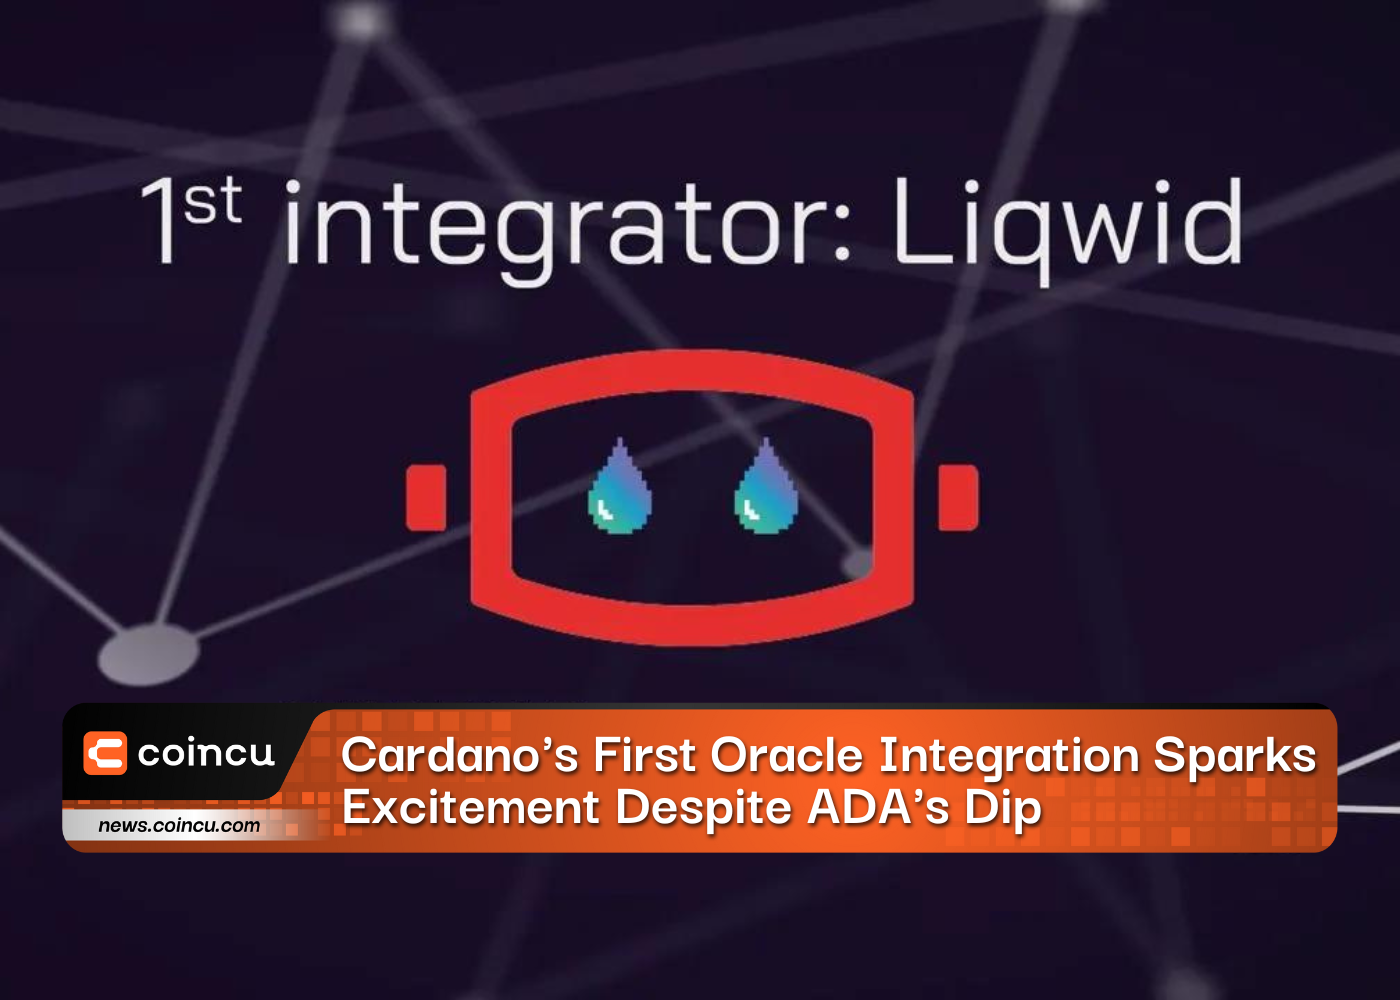 Cardano's First Oracle Integration Sparks Excitement Despite ADA's Dip - CoinCu News